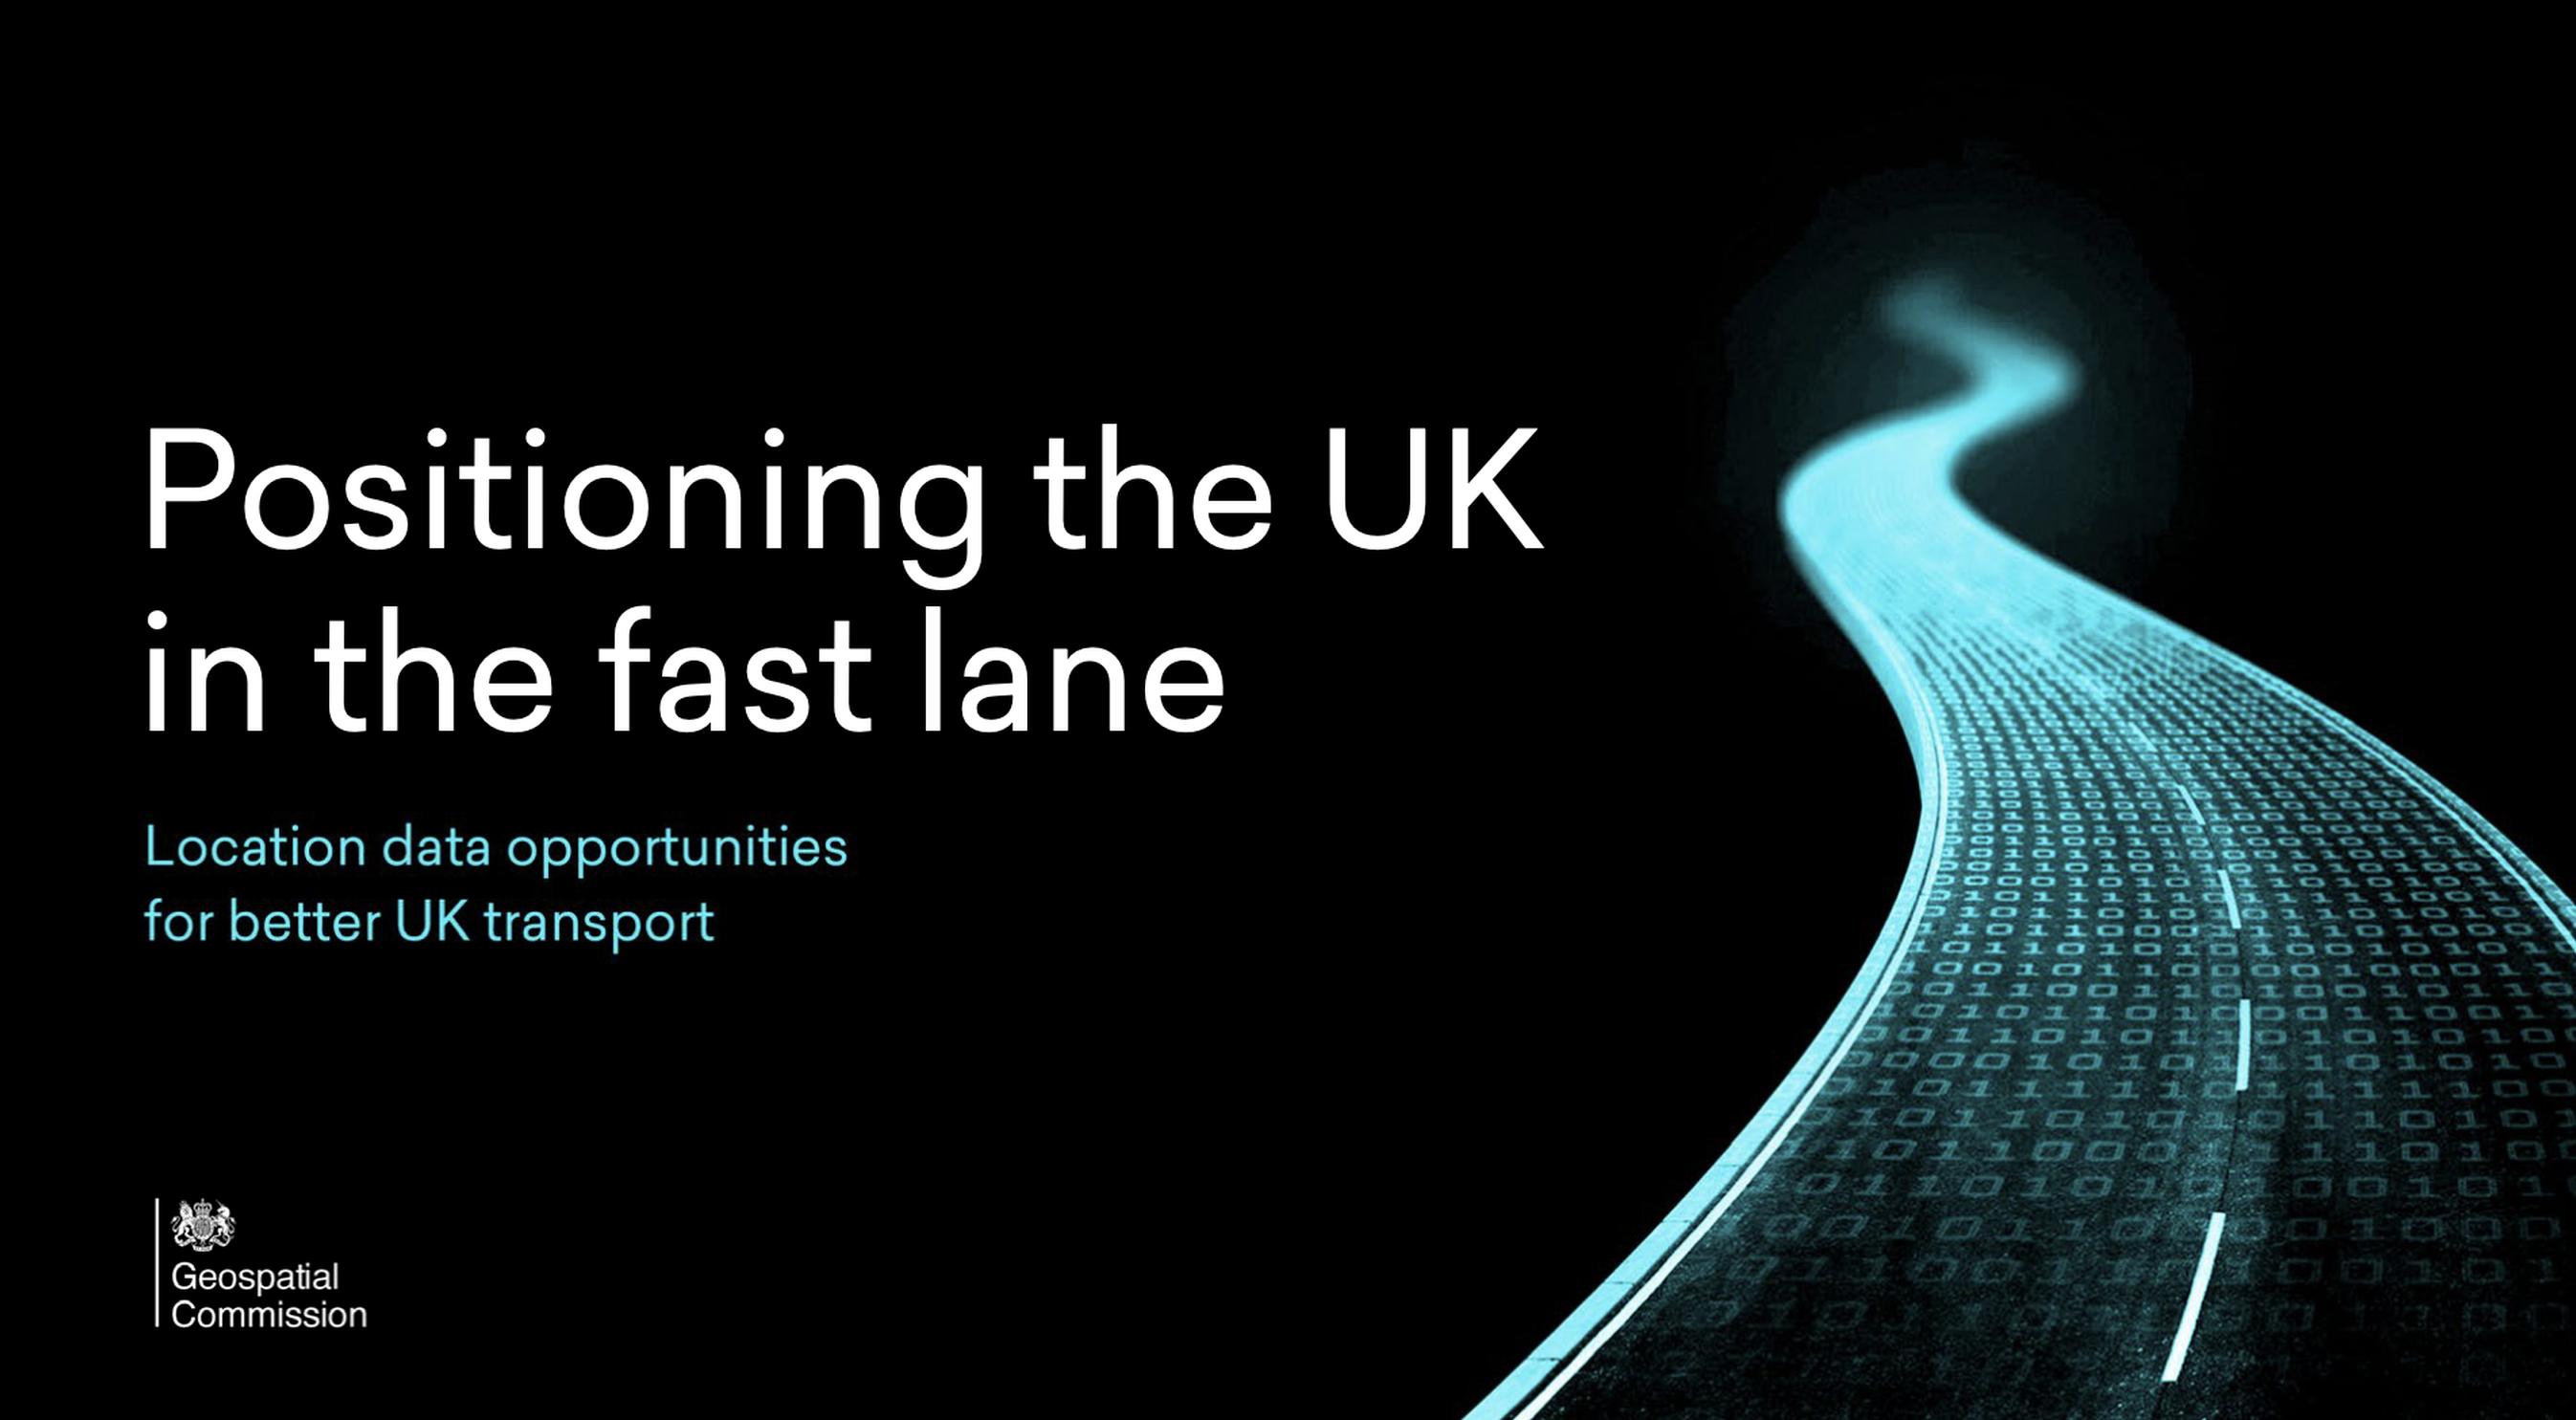 The Geospatial Commission has published its transport findings report: Positioning the UK in the fast lane - Location data opportunities for better UK transport